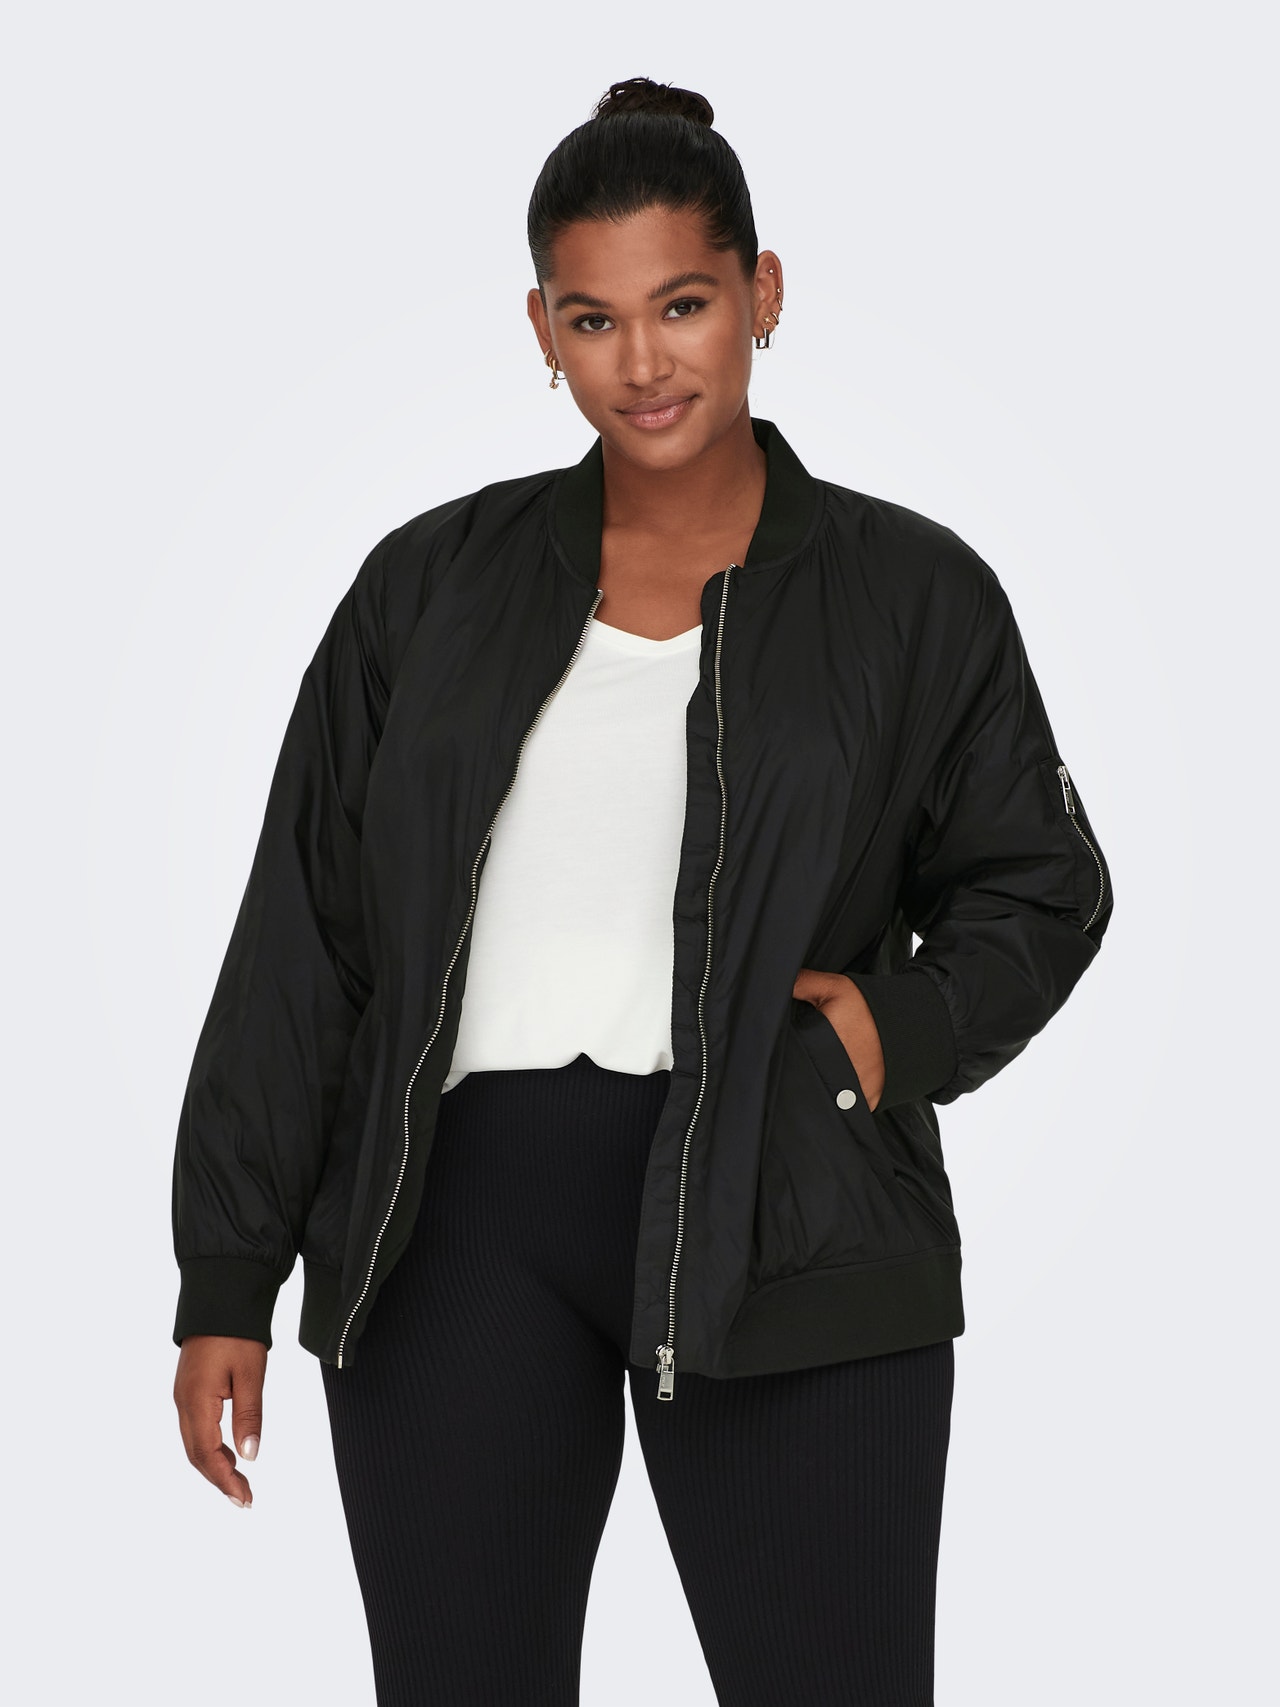 ONLY Baseball Curve Ribbed cuffs Jacket -Black - 15295406